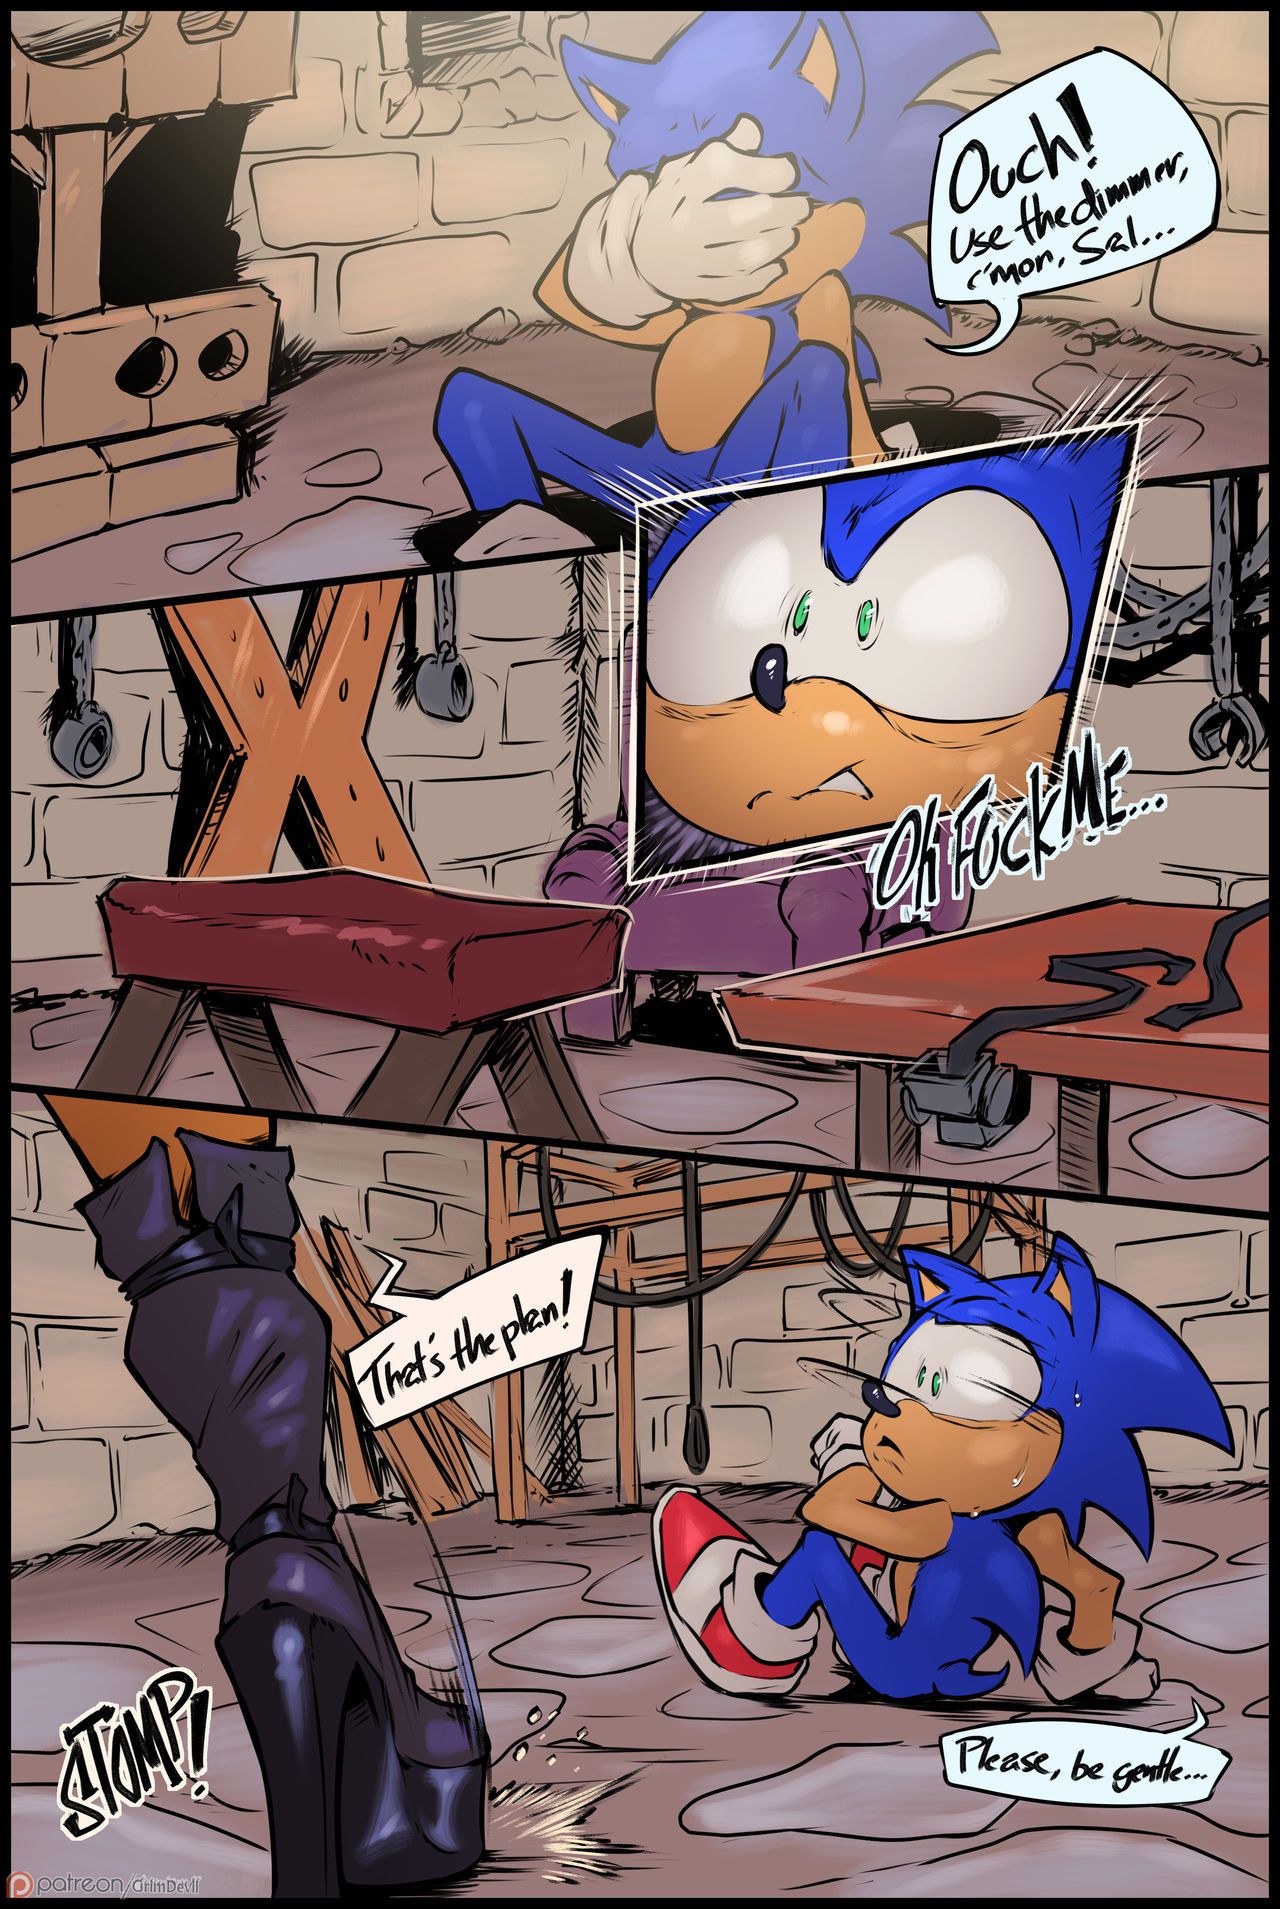 [GrimDevil] Sally Comic (Sonic The Hedgehog) [Ongoing] 28